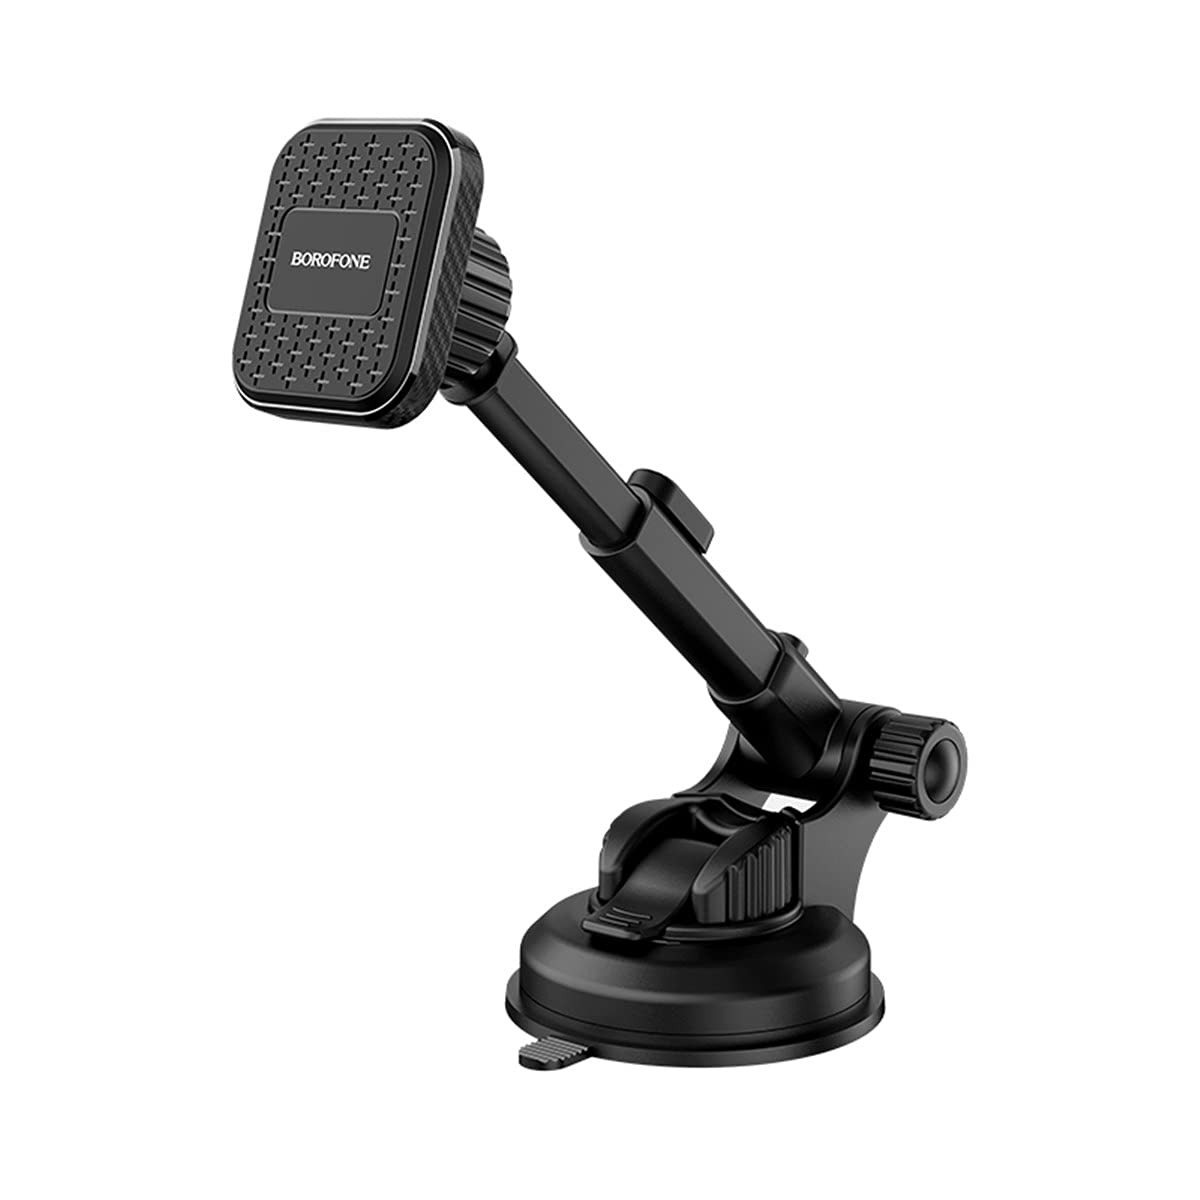 RAKPG Magnetic Car Phone Mount, Universal Cell Phone Holder on Dashboard or Windshield, with Strong Sticky Suction Cup and Multi-Angle Adjustable Arm, Black